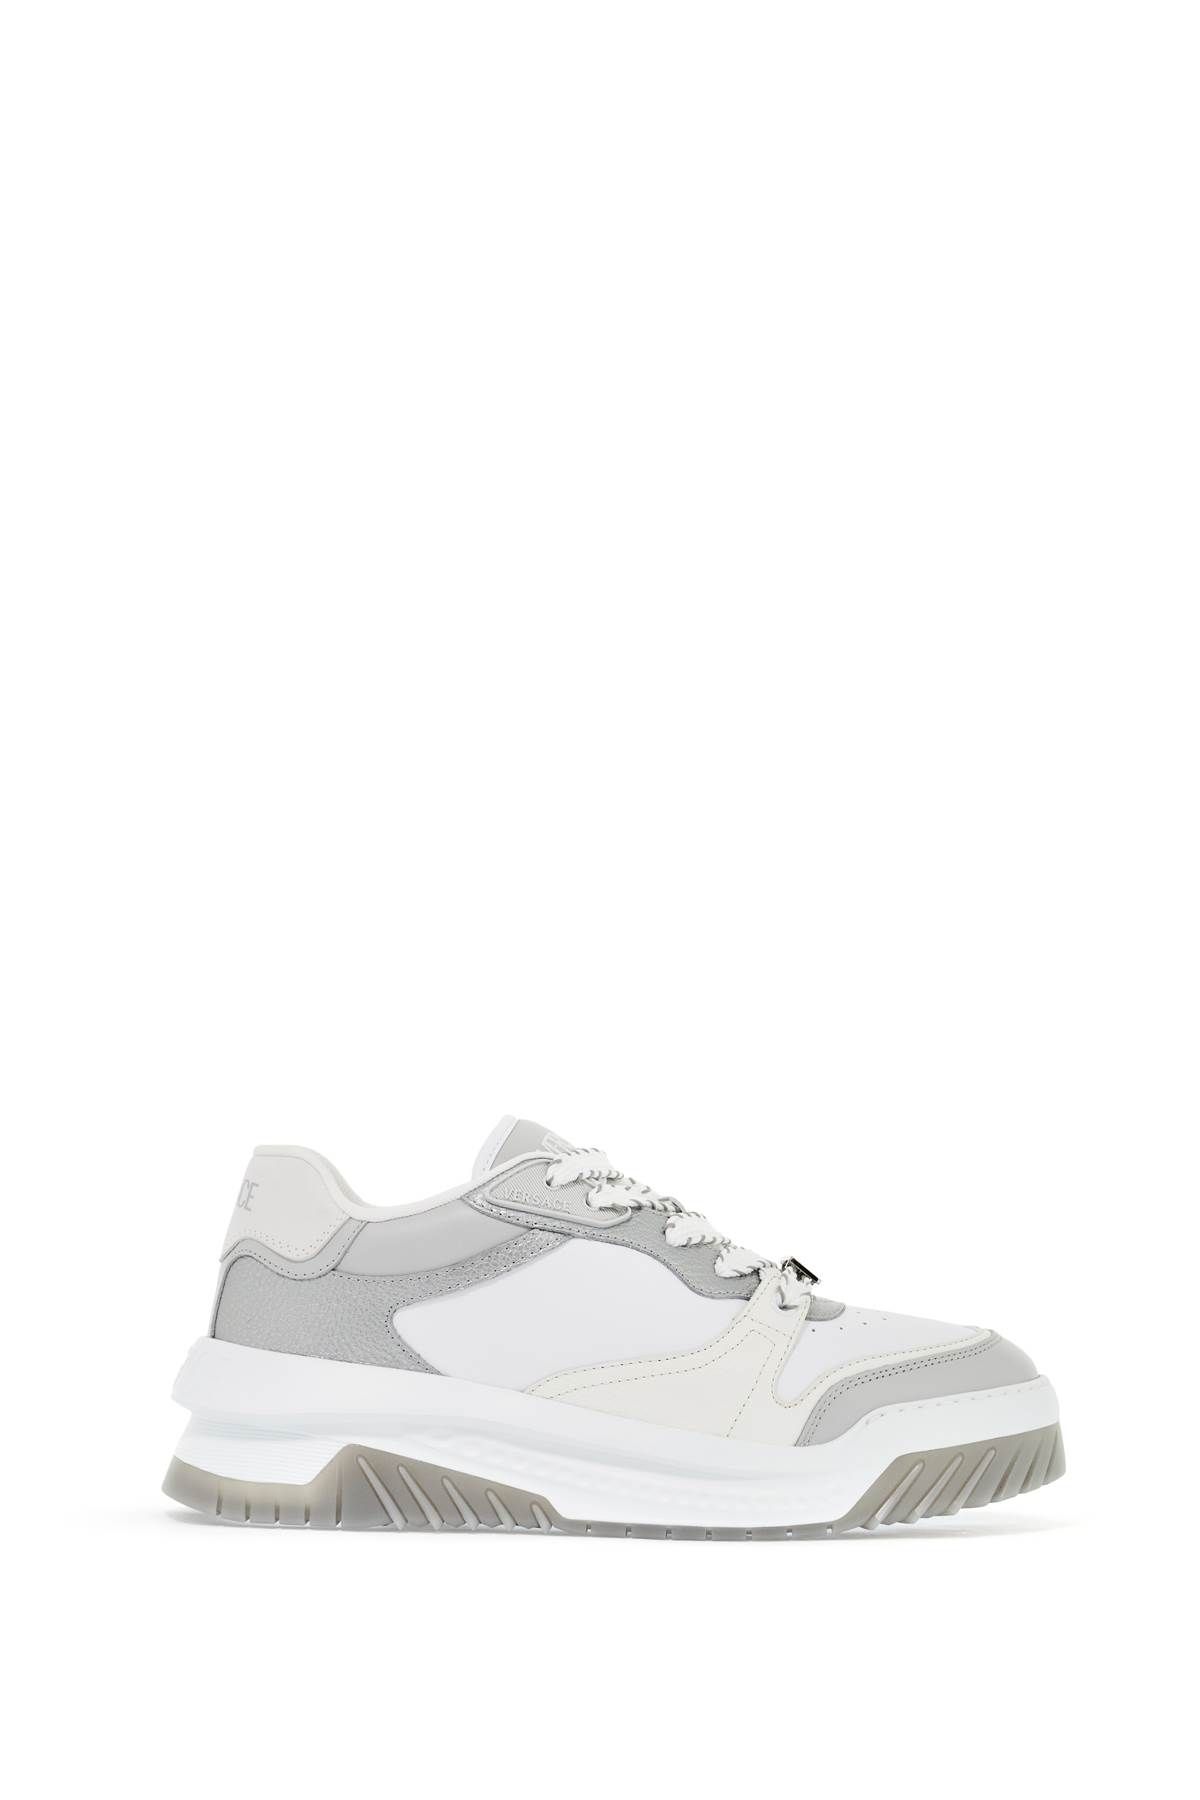 Versace Odyssey Sneakers In White